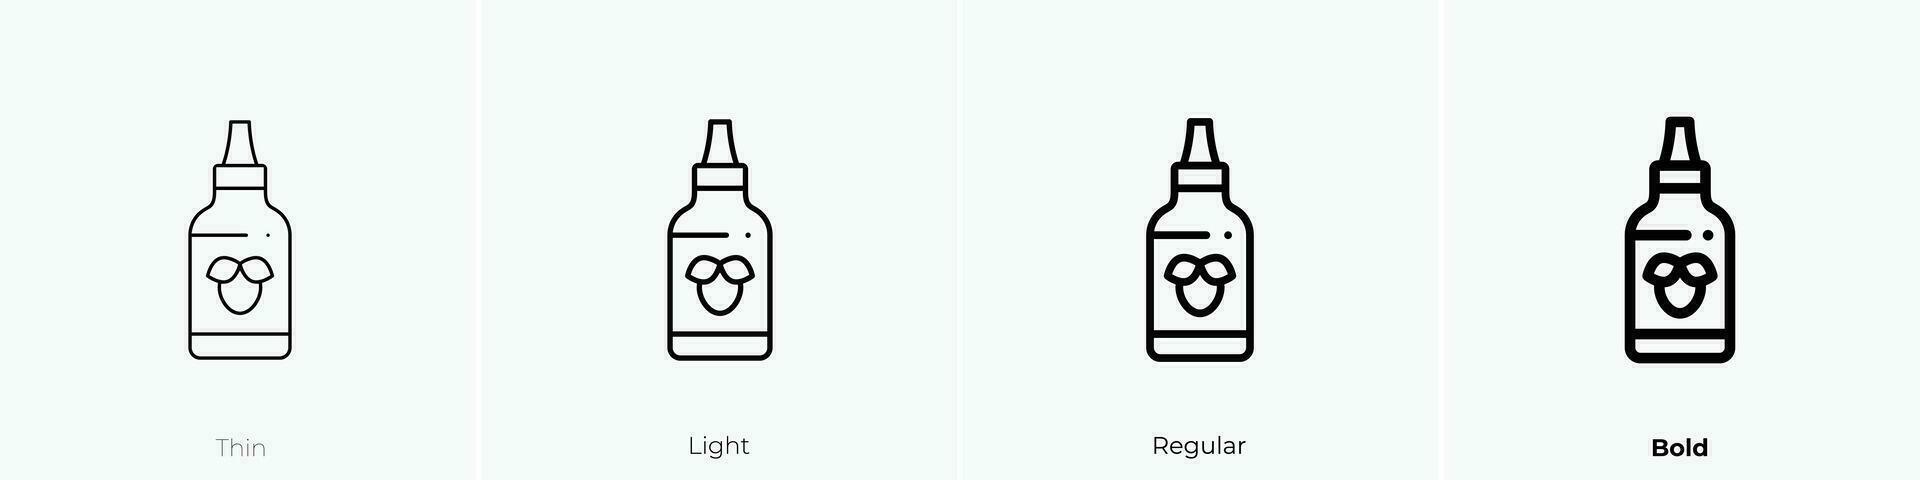 syrup icon. Thin, Light, Regular And Bold style design isolated on white background vector